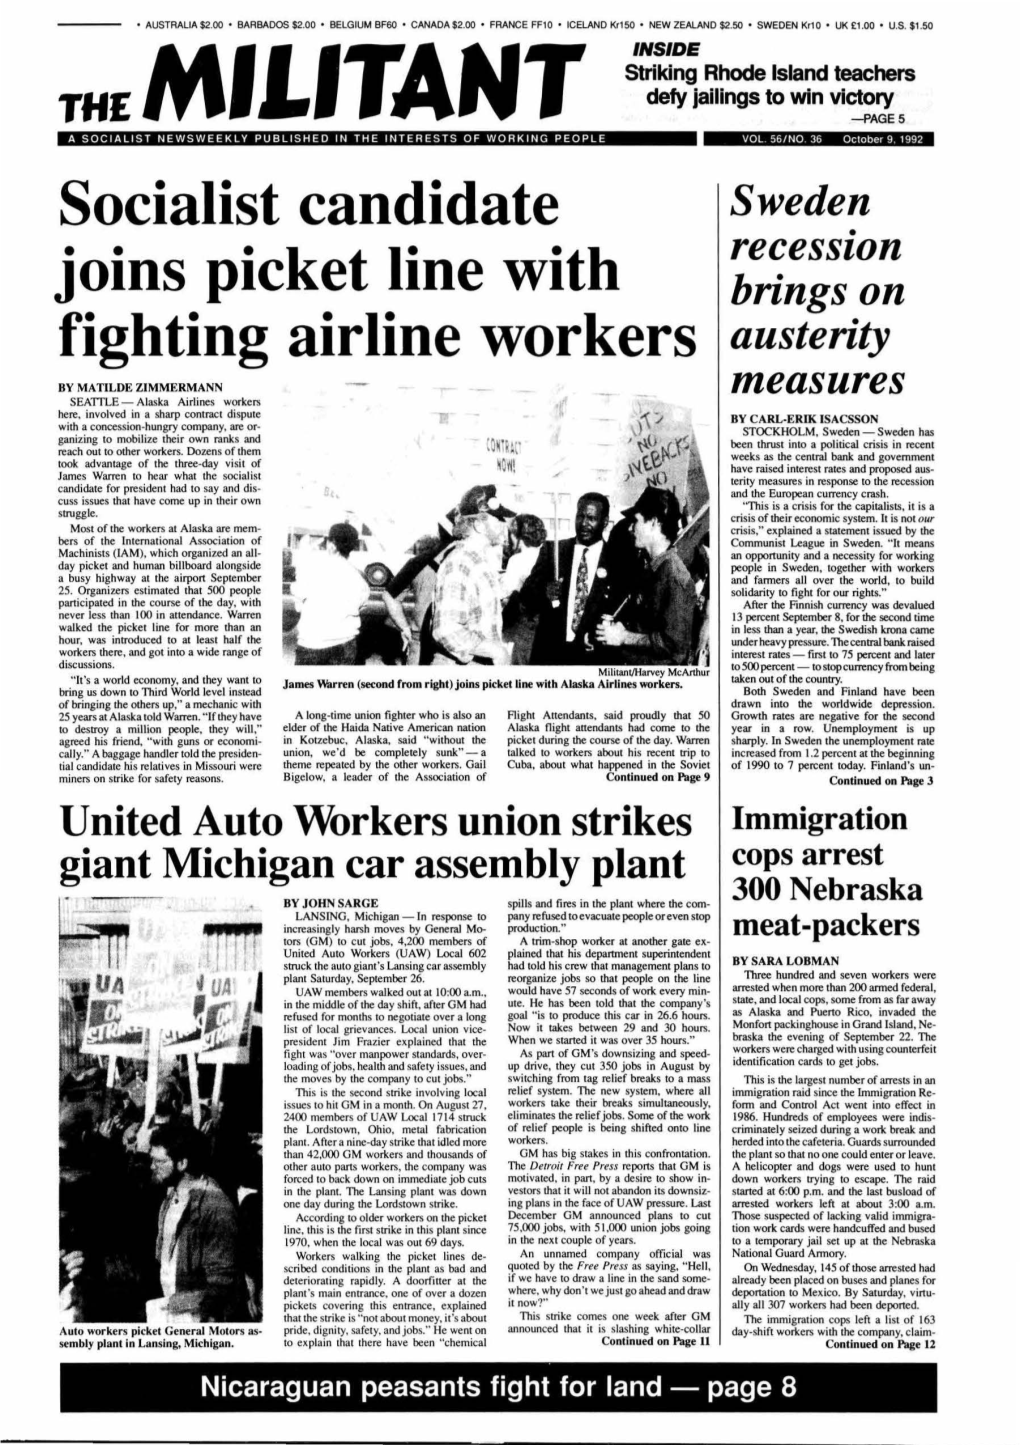 Socialist Candidate Joins Picket Line with Fighting Airline Workers